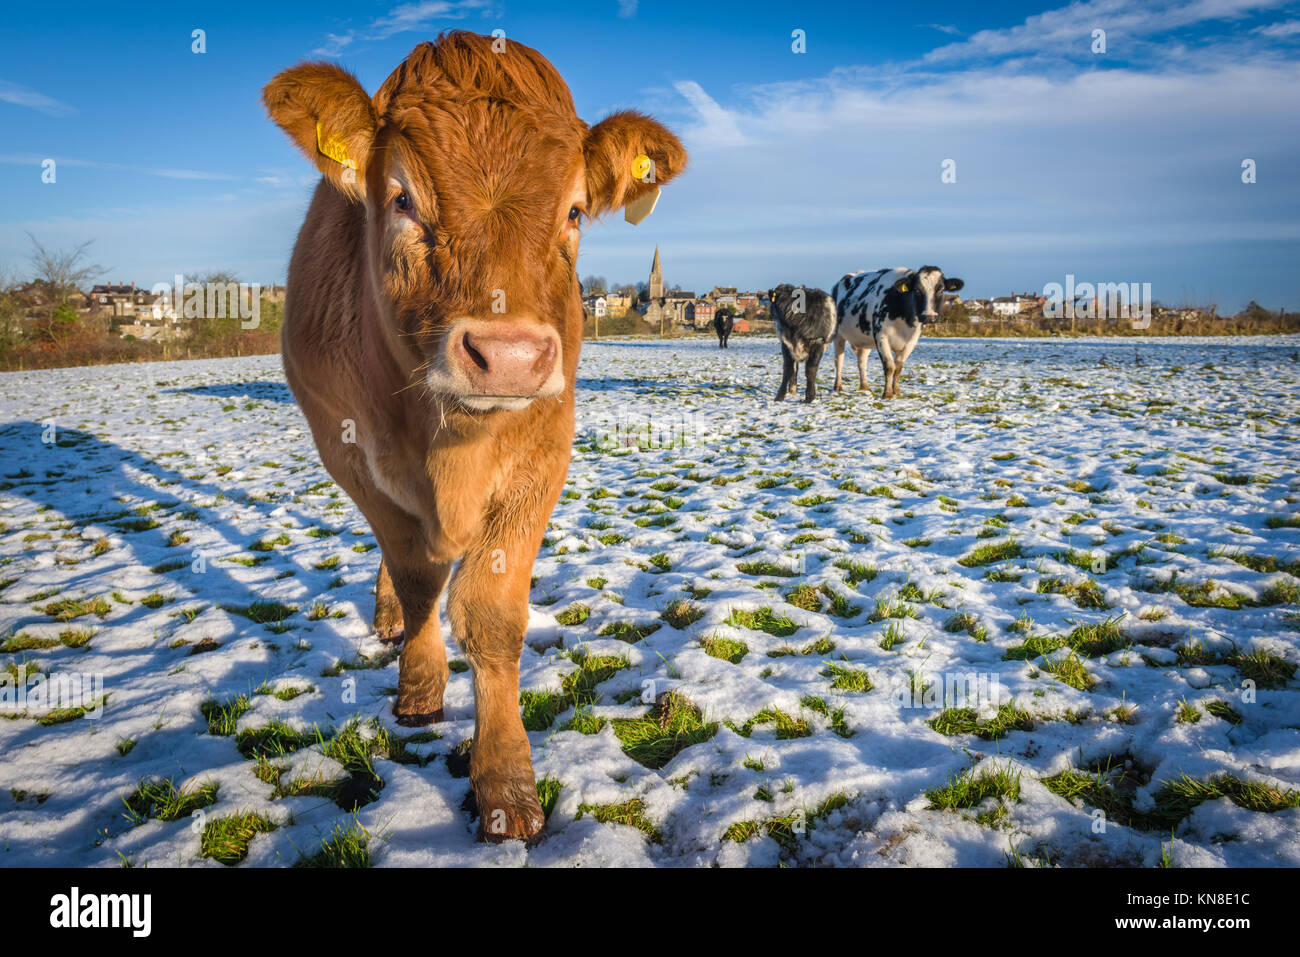 Malmesbury, UK. 11th Dec, 2017.  UK Weather - After the previous days heavy snowfall, a herd of cows enjoy a brief spell of sunshine in the fields surrounding the Wiltshire hillside town of Malmesbury. Credit: Terry Mathews/Alamy Live News Stock Photo